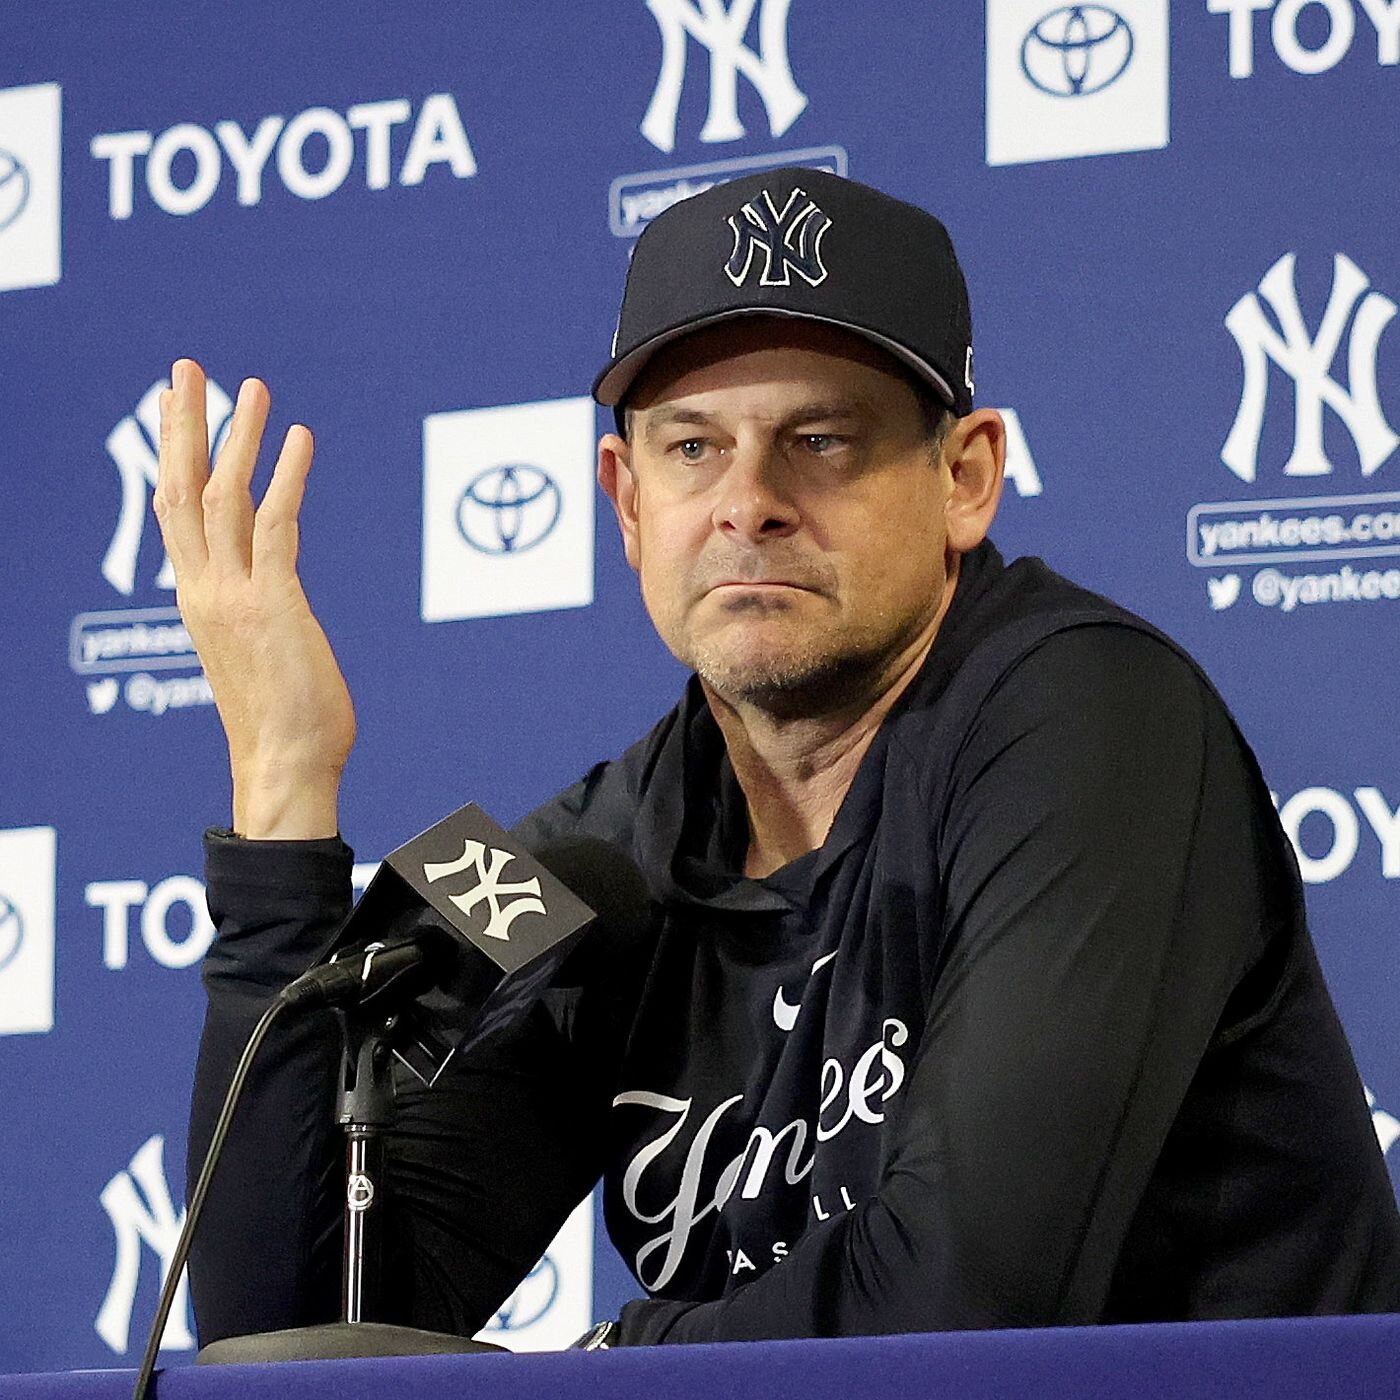 ESPN report: Aaron Boone makes a serious confession about the New York Yankees (51-26) lost to Orioles.